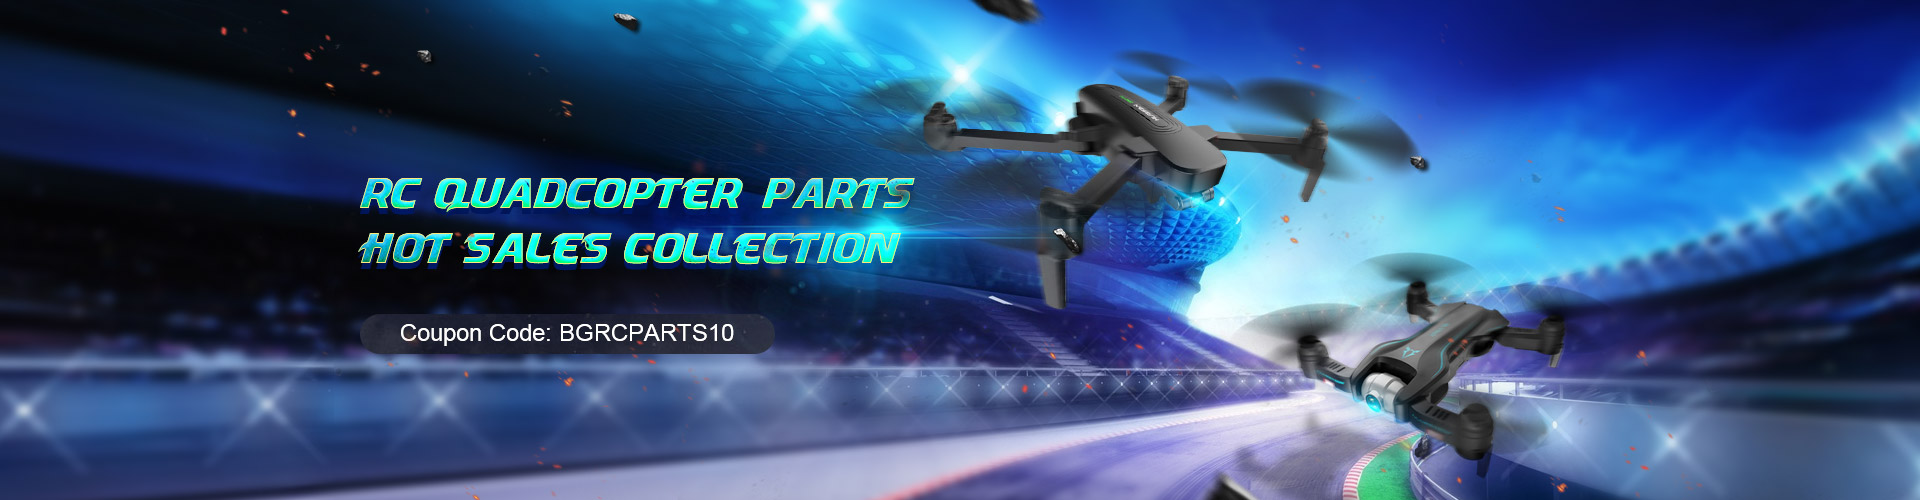 RC Quadcopter&Parts Hot Sales Collection 10% OFF